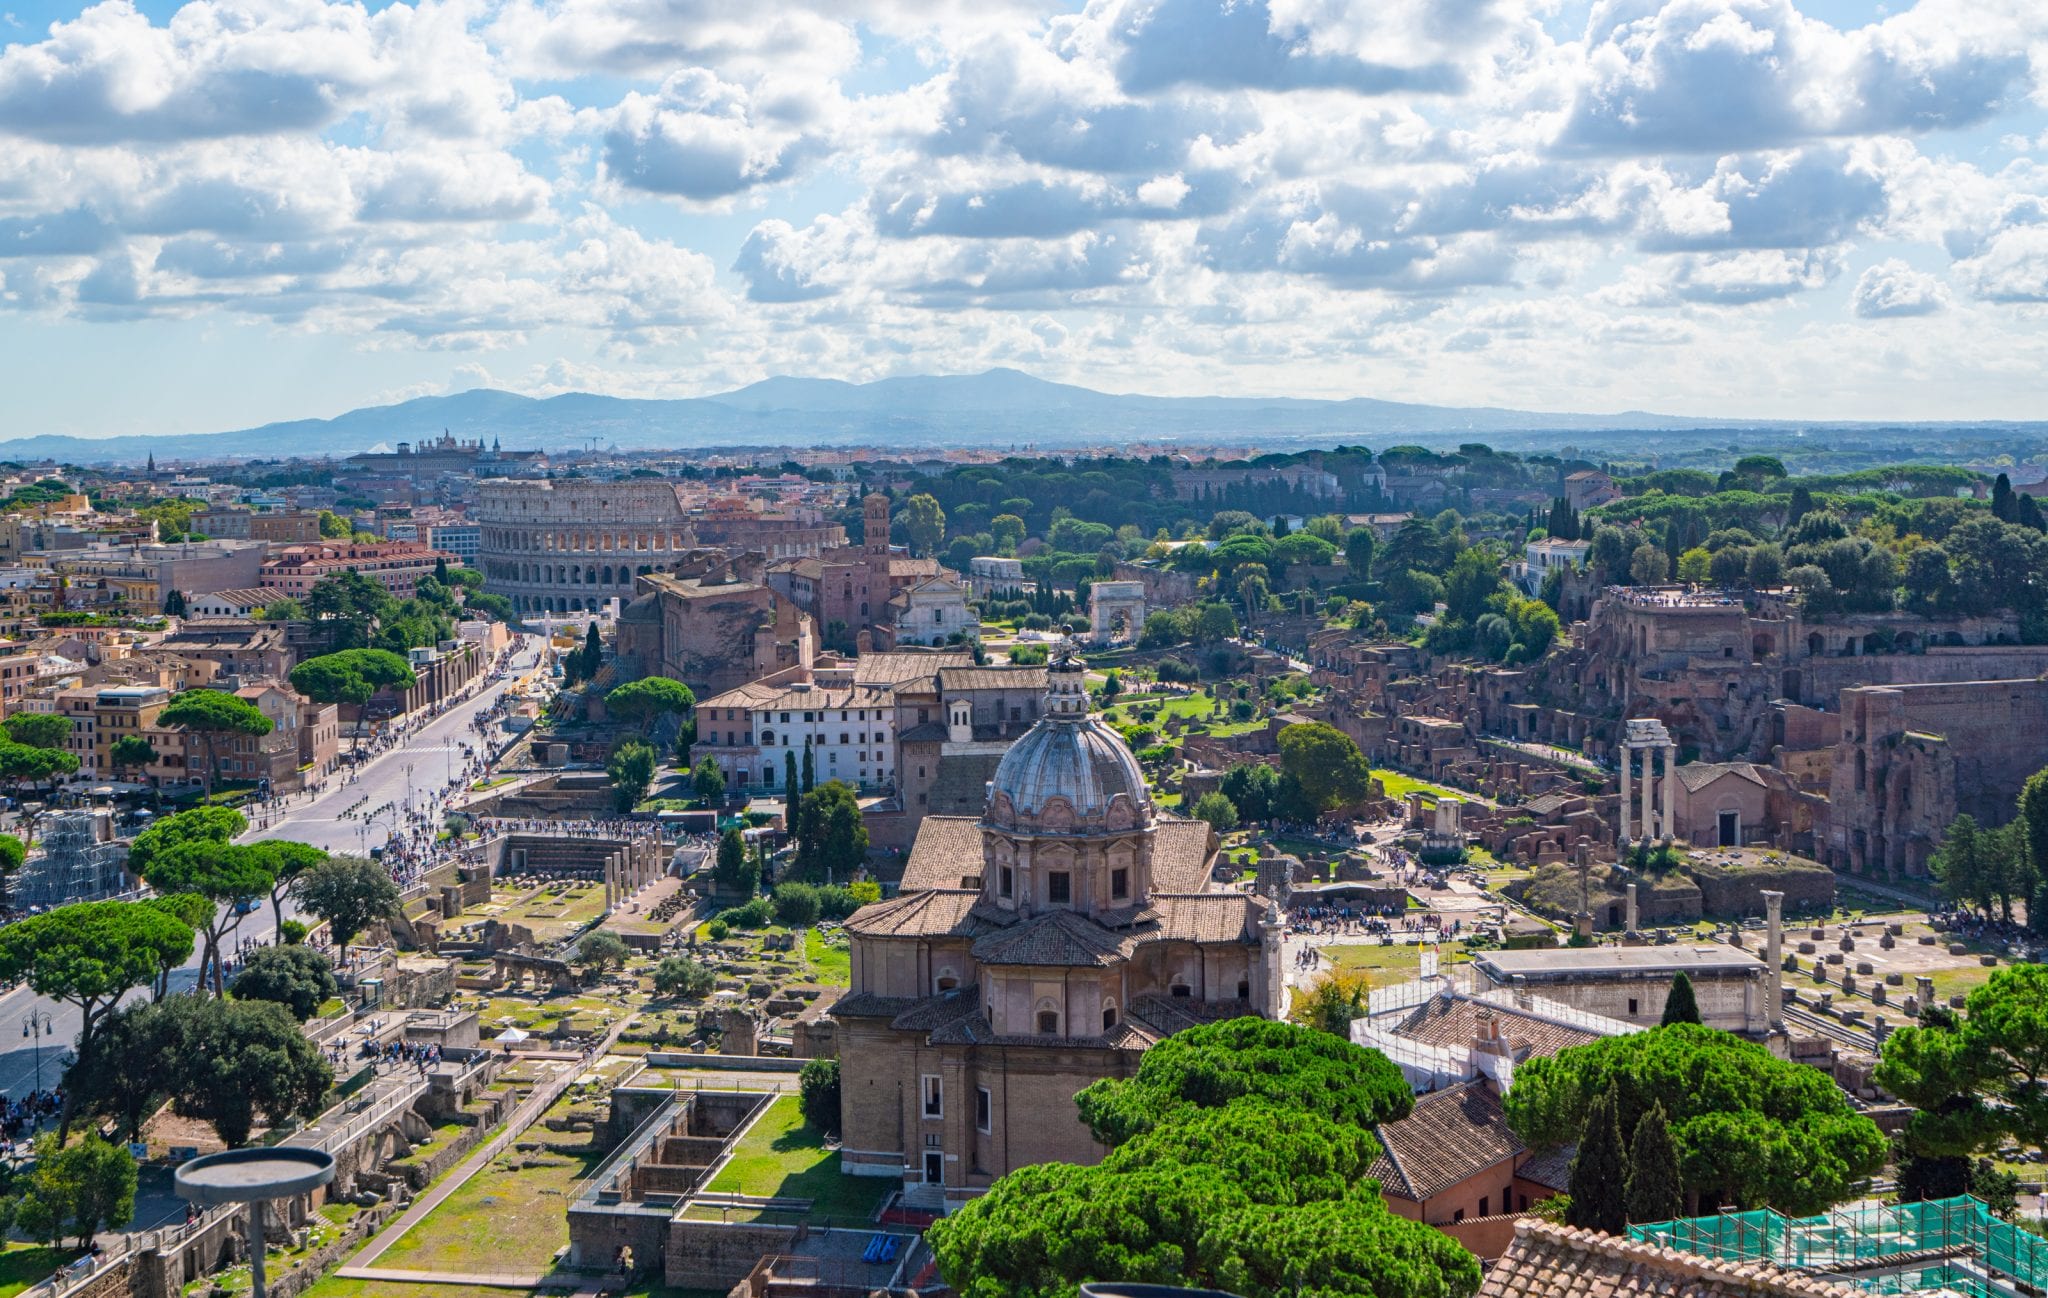 View of the Roman Forum and Colosseum from tha Altare della Patria, one of the best viewpoints in Rome